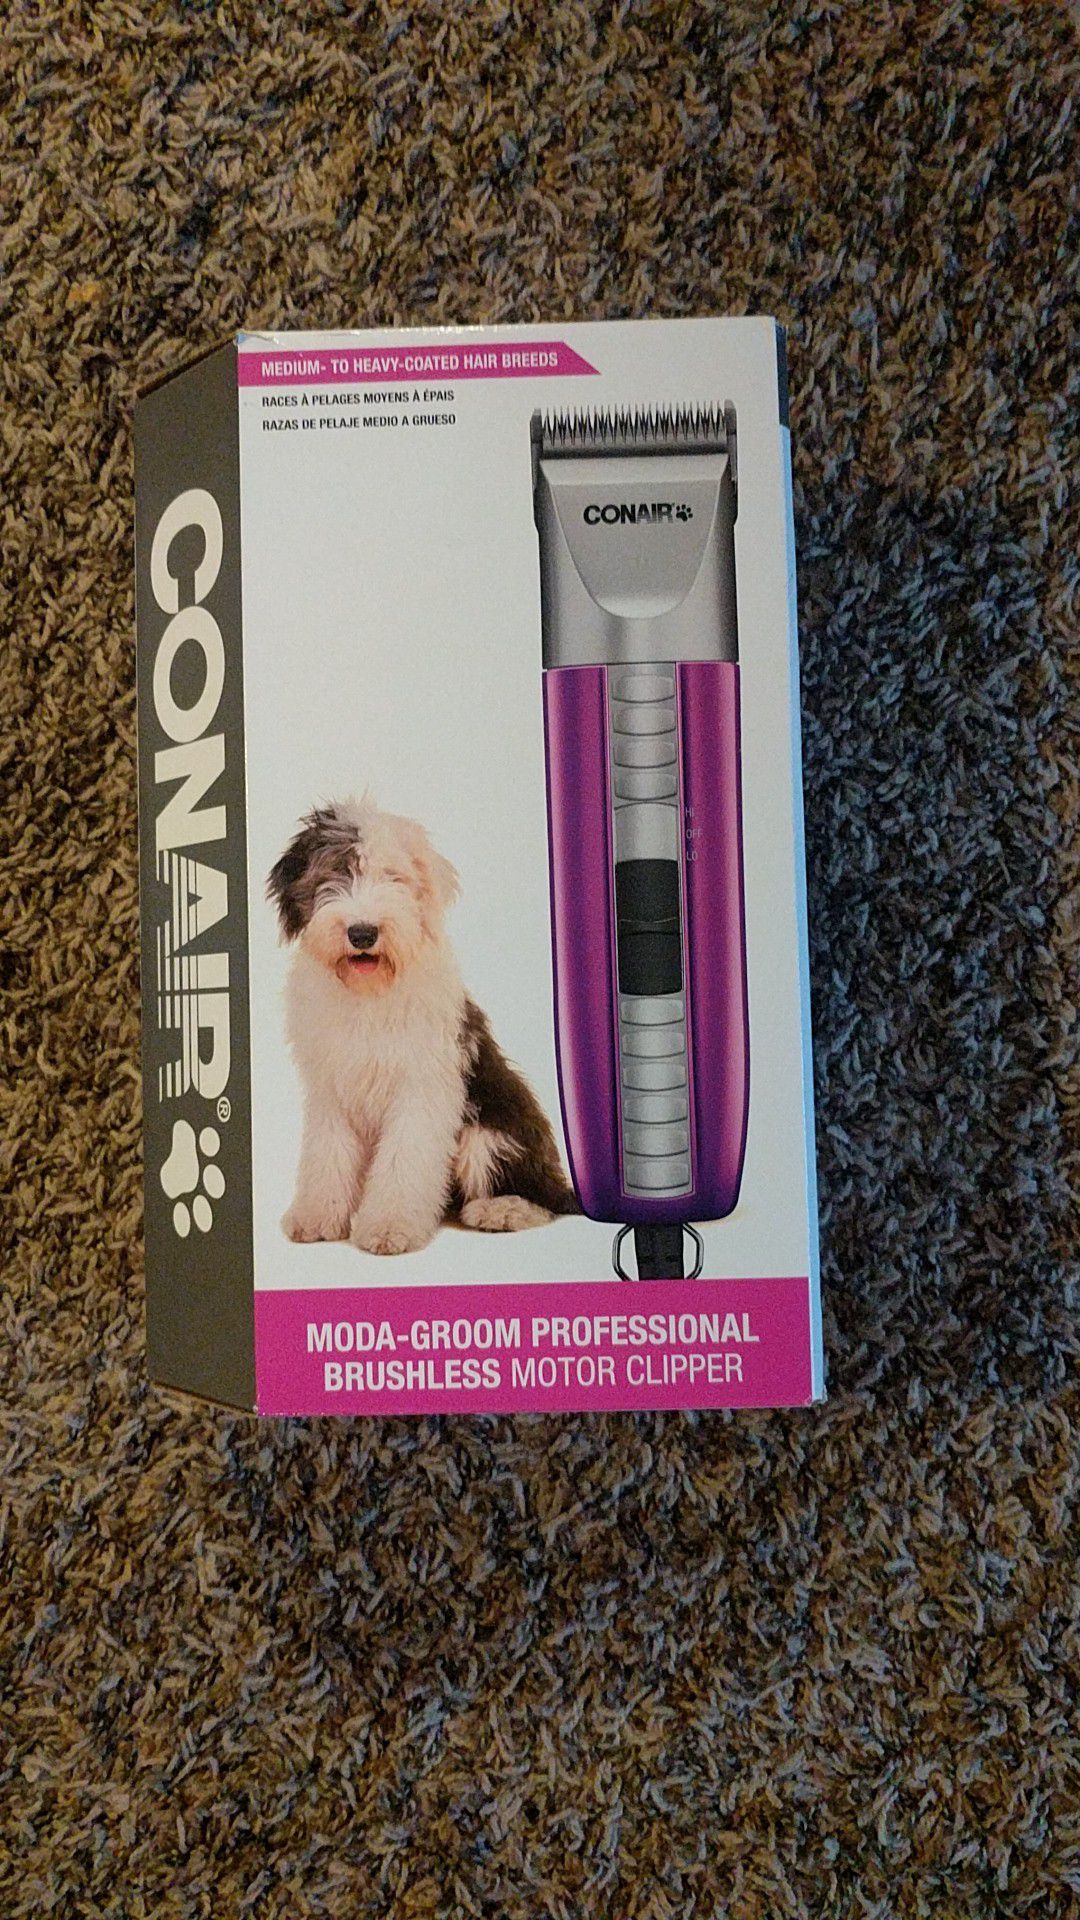 Conair brushless motor clippers (pet grooming)